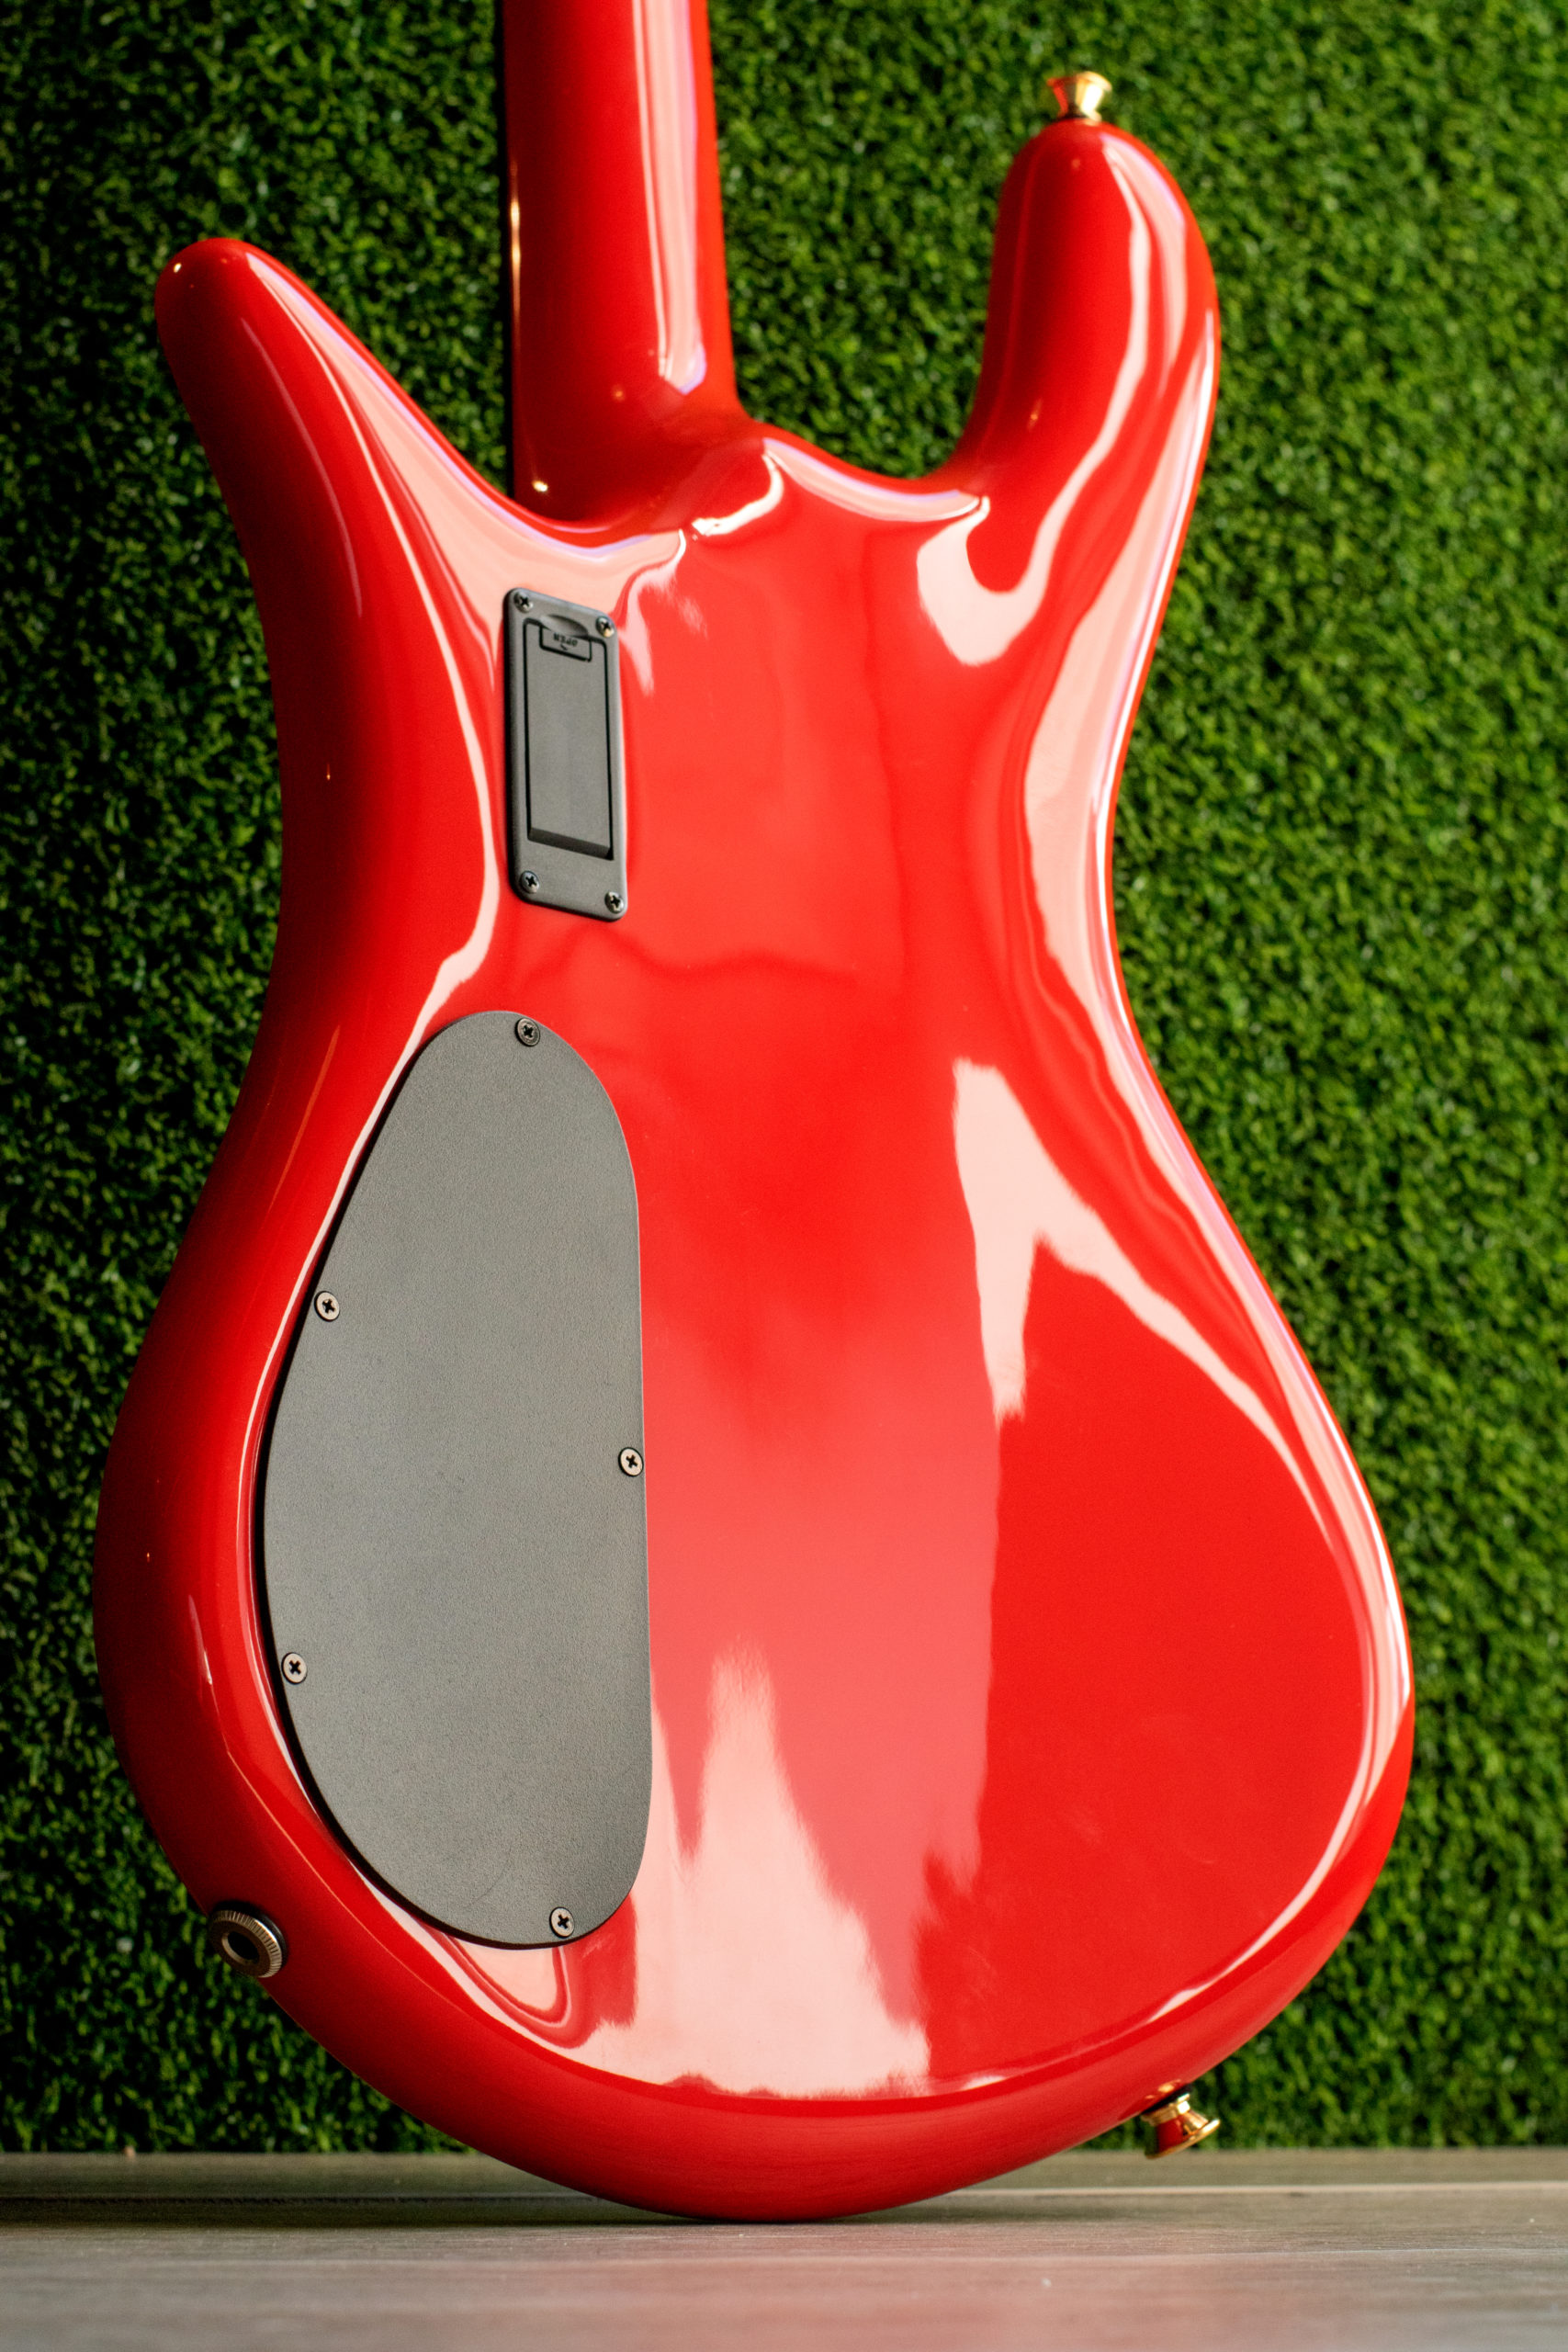 back of red Spector bass